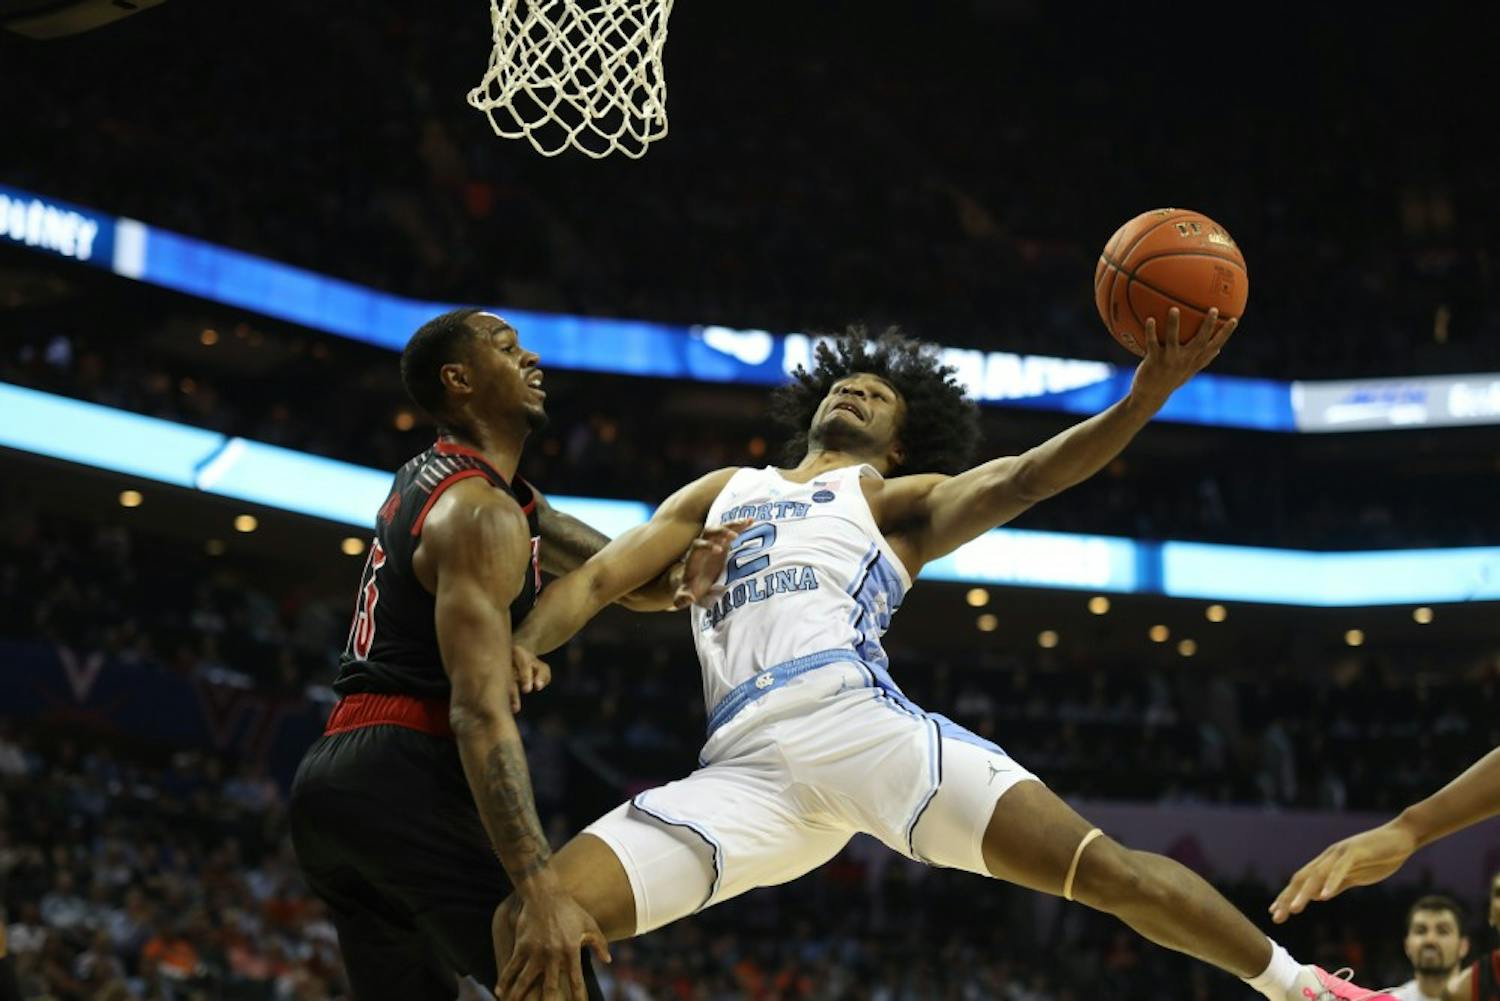 No. 2 seed UNC defeats No. 7 seed Louisville, 83-70, in ACC Tournament quarterfinals